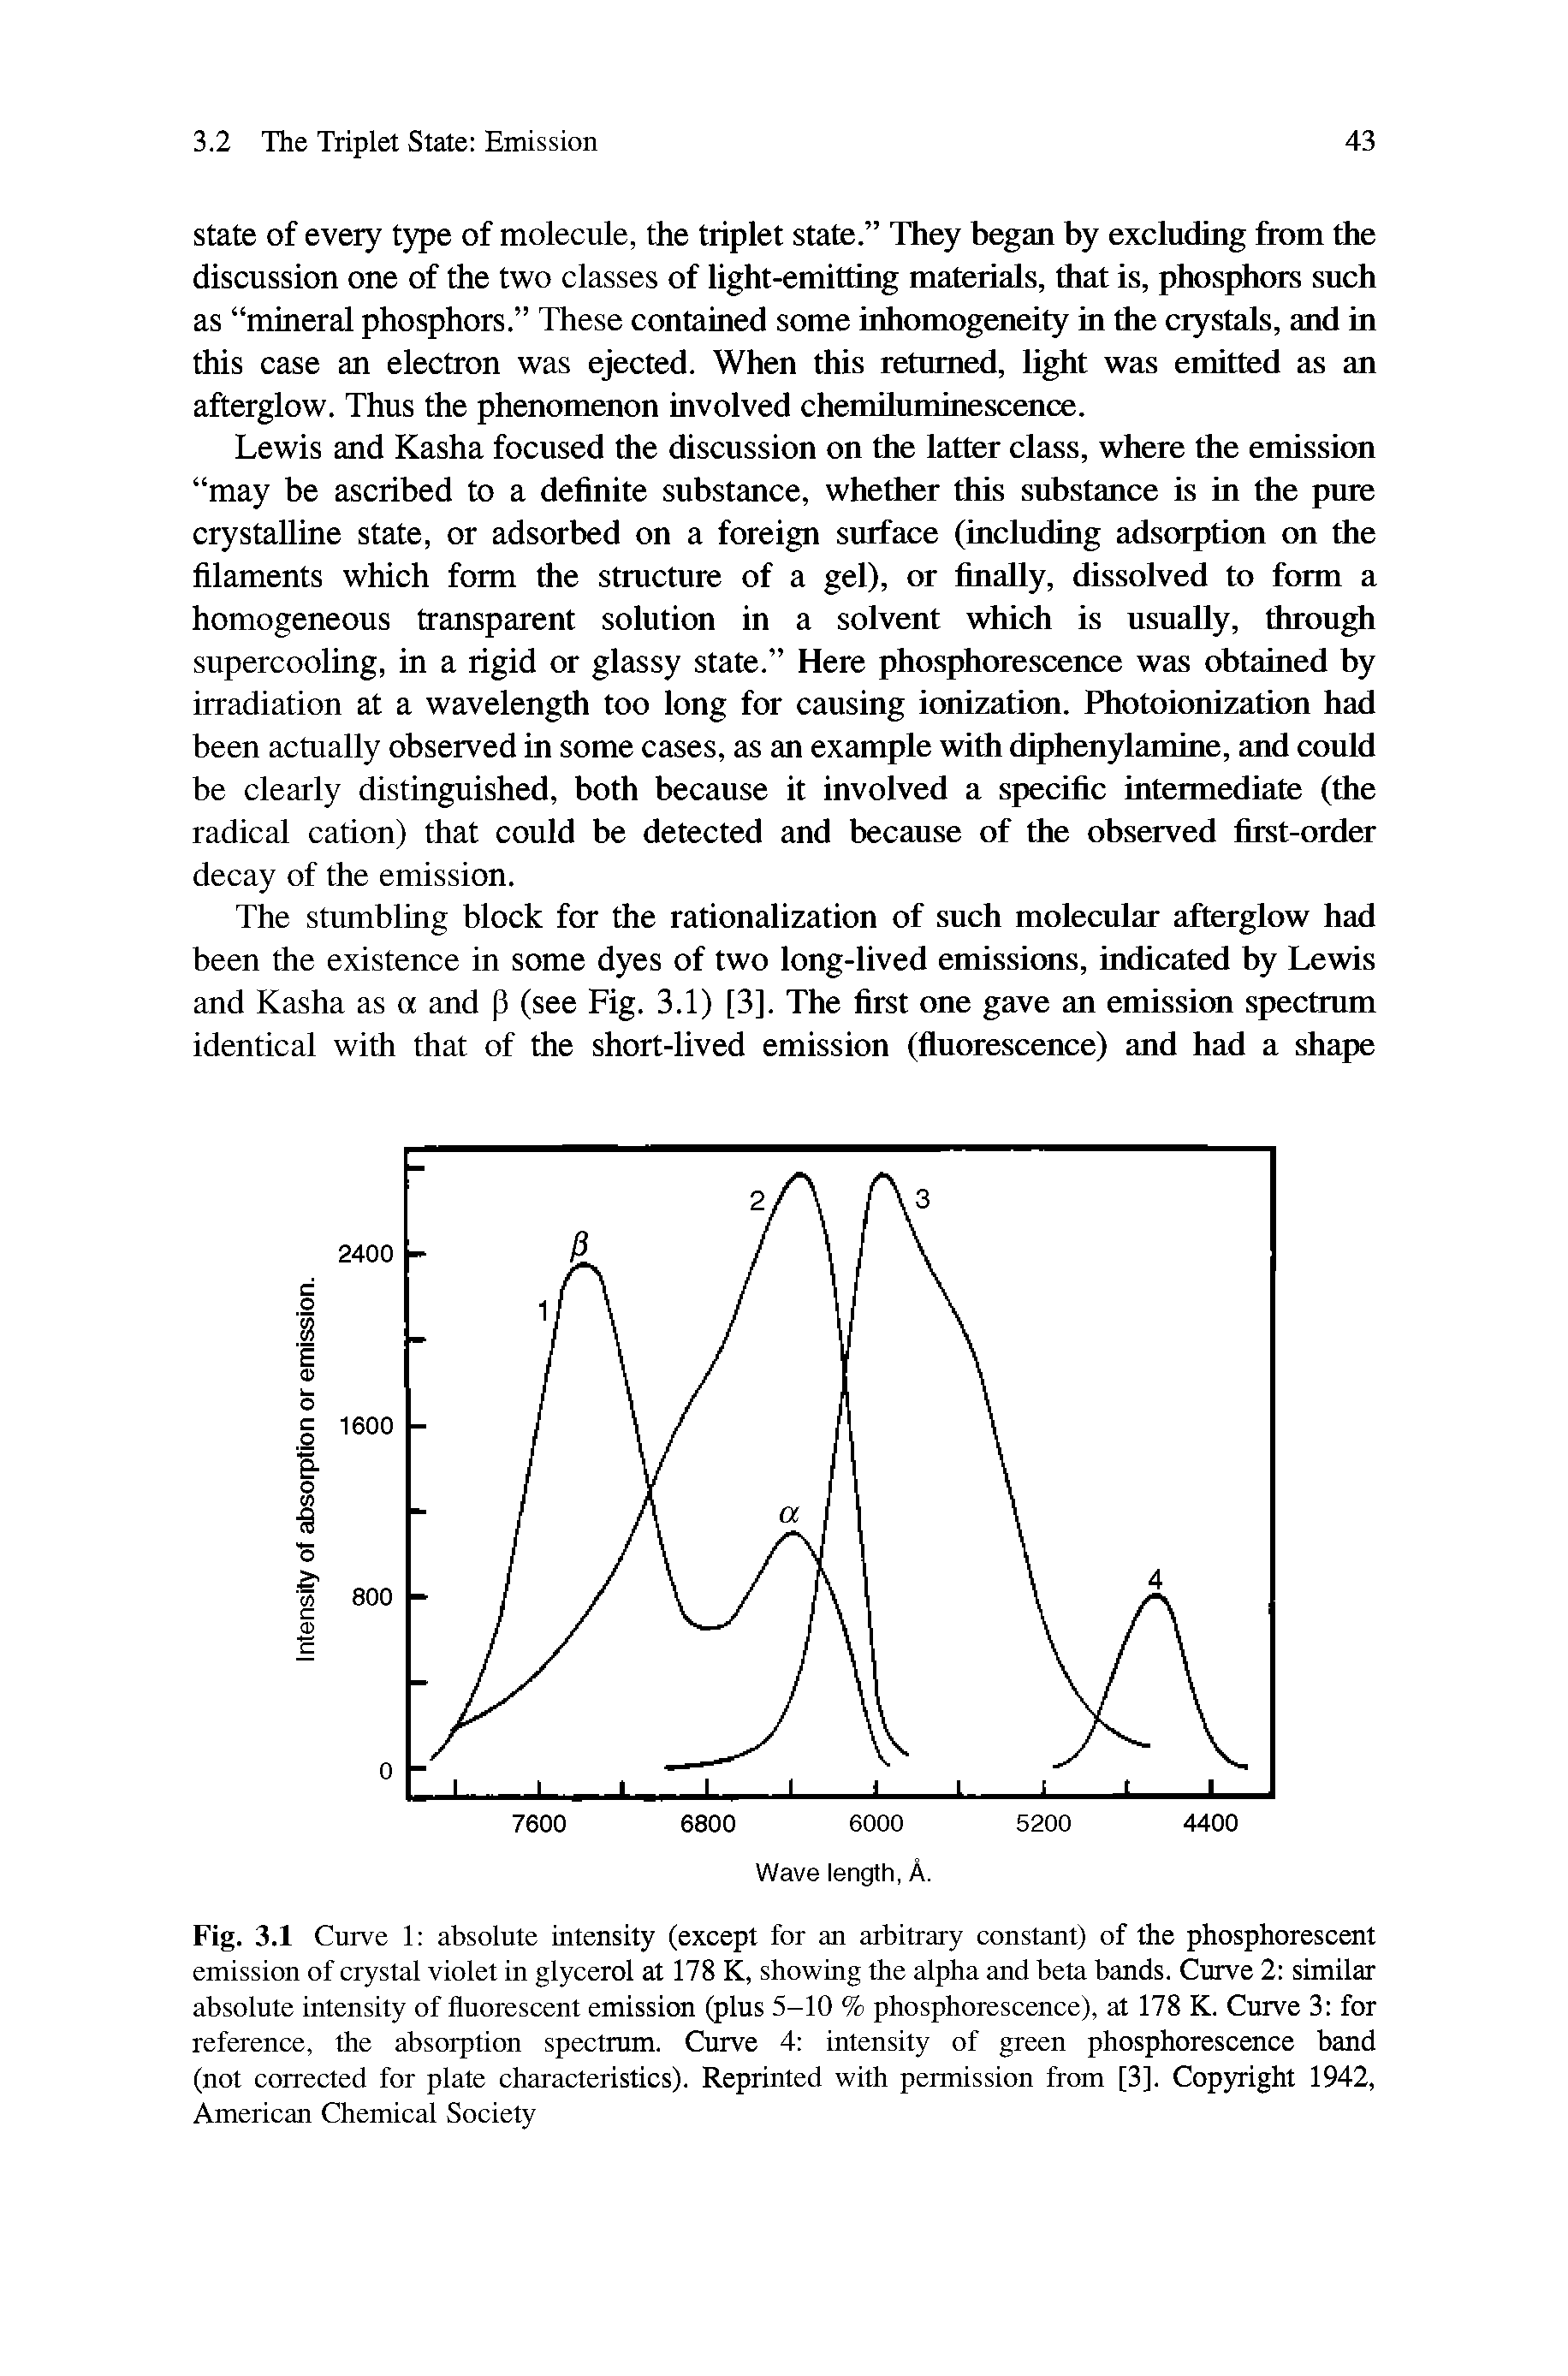 Fig. 3.1 Curve 1 absolute intensity (except for an arbitrary constant) of the phosphorescent emission of crystal violet in glycerol at 178 K, showing the alpha and beta bands. Curve 2 similar absolute intensity of fluorescent emission (plus 5-10 % phosphorescence), at 178 K. Curve 3 for reference, the absorption spectrum. Curve 4 intensity of green phosphorescence band (not corrected for plate characteristics). Reprinted with permission from [3]. Copyright 1942, American Chemical Society...